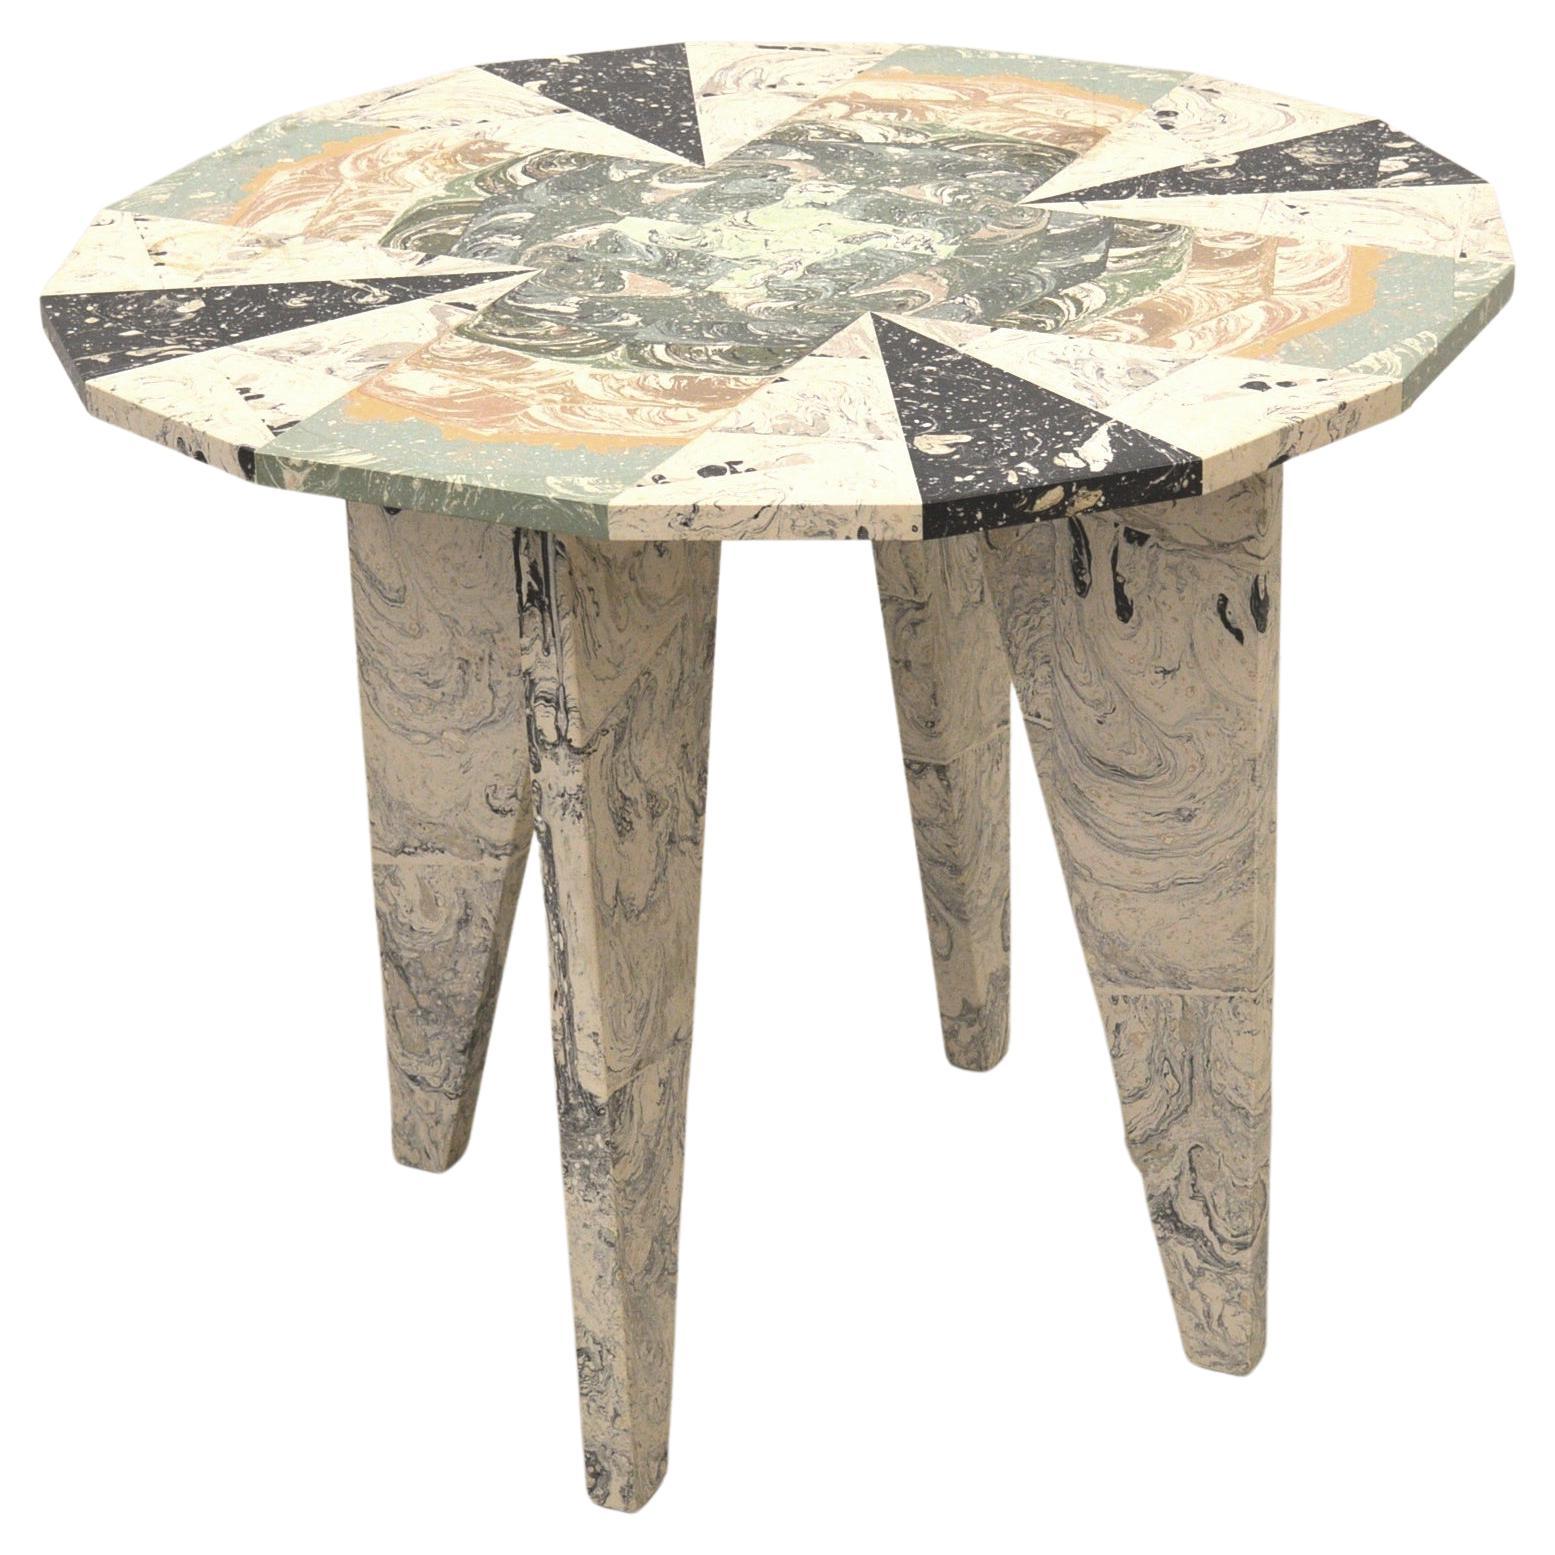 Contemporary 1 of a Kind Jesmonite Centre Table by Hilda Hellström For Sale